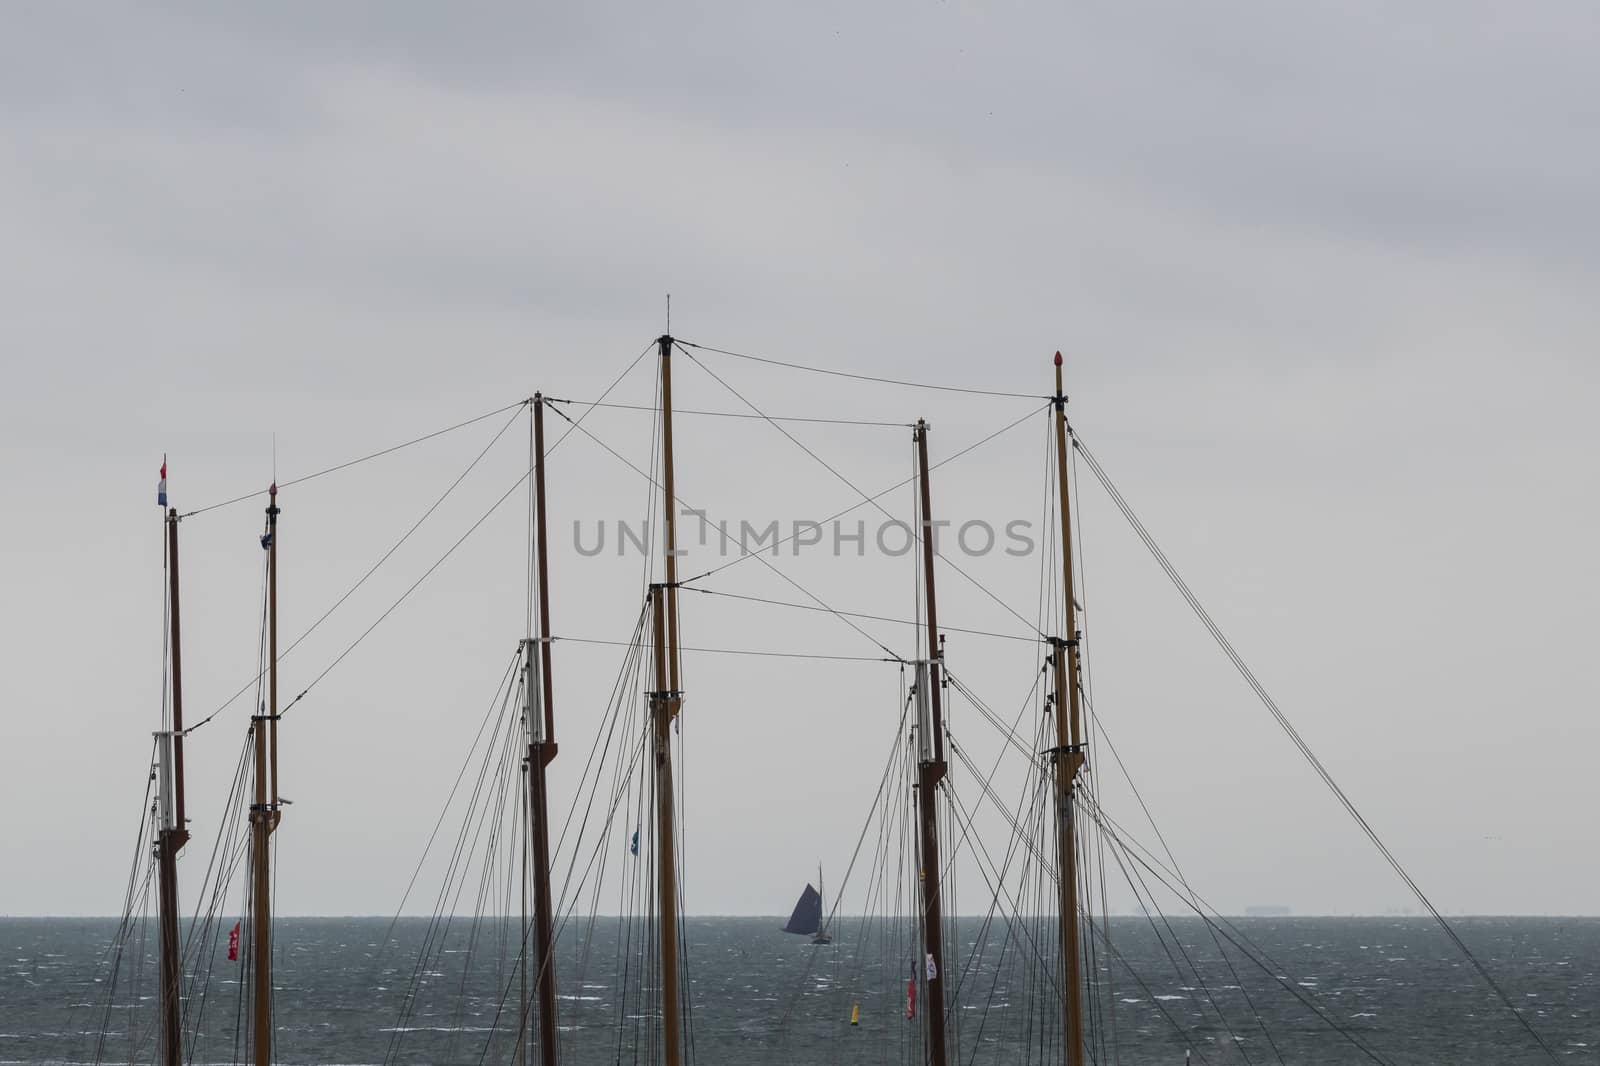 Sailboat at sea seen through the masts of two three-masted sailb by Tofotografie